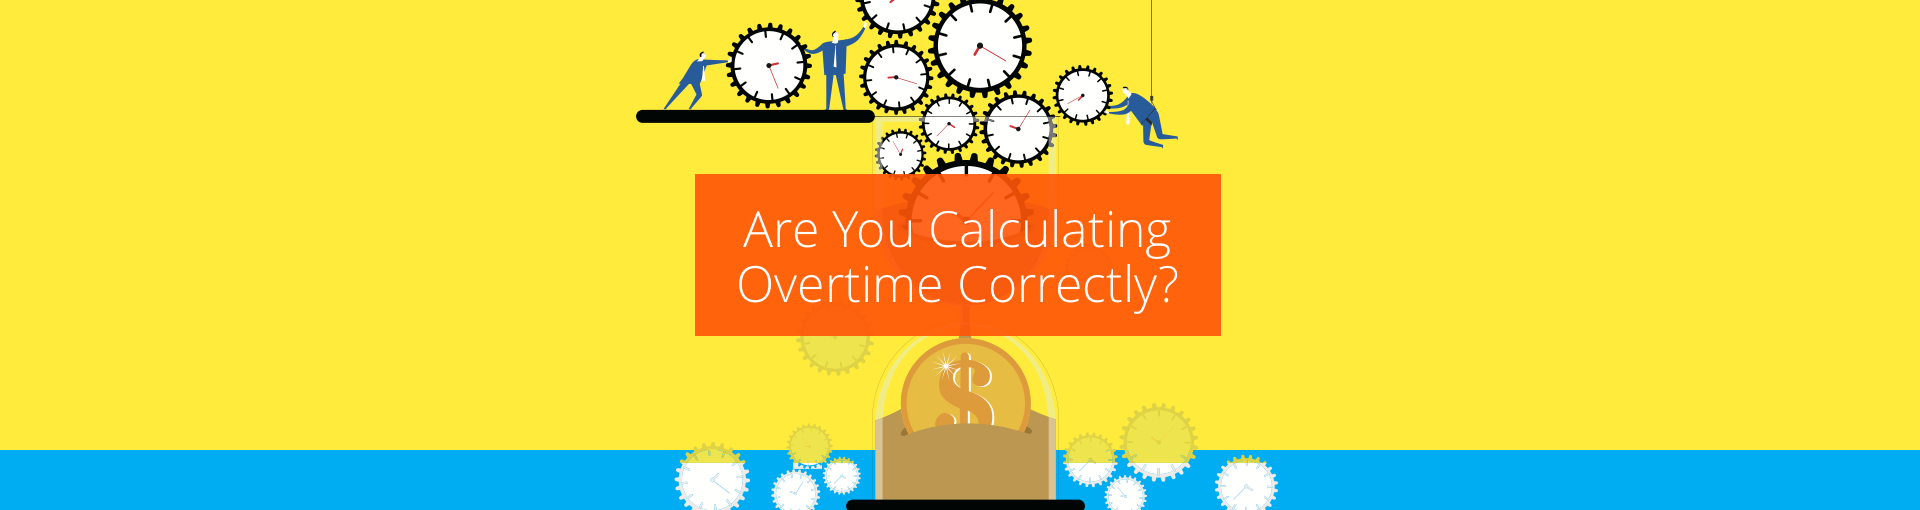 Are You Calculating Overtime Correctly? Featured Image